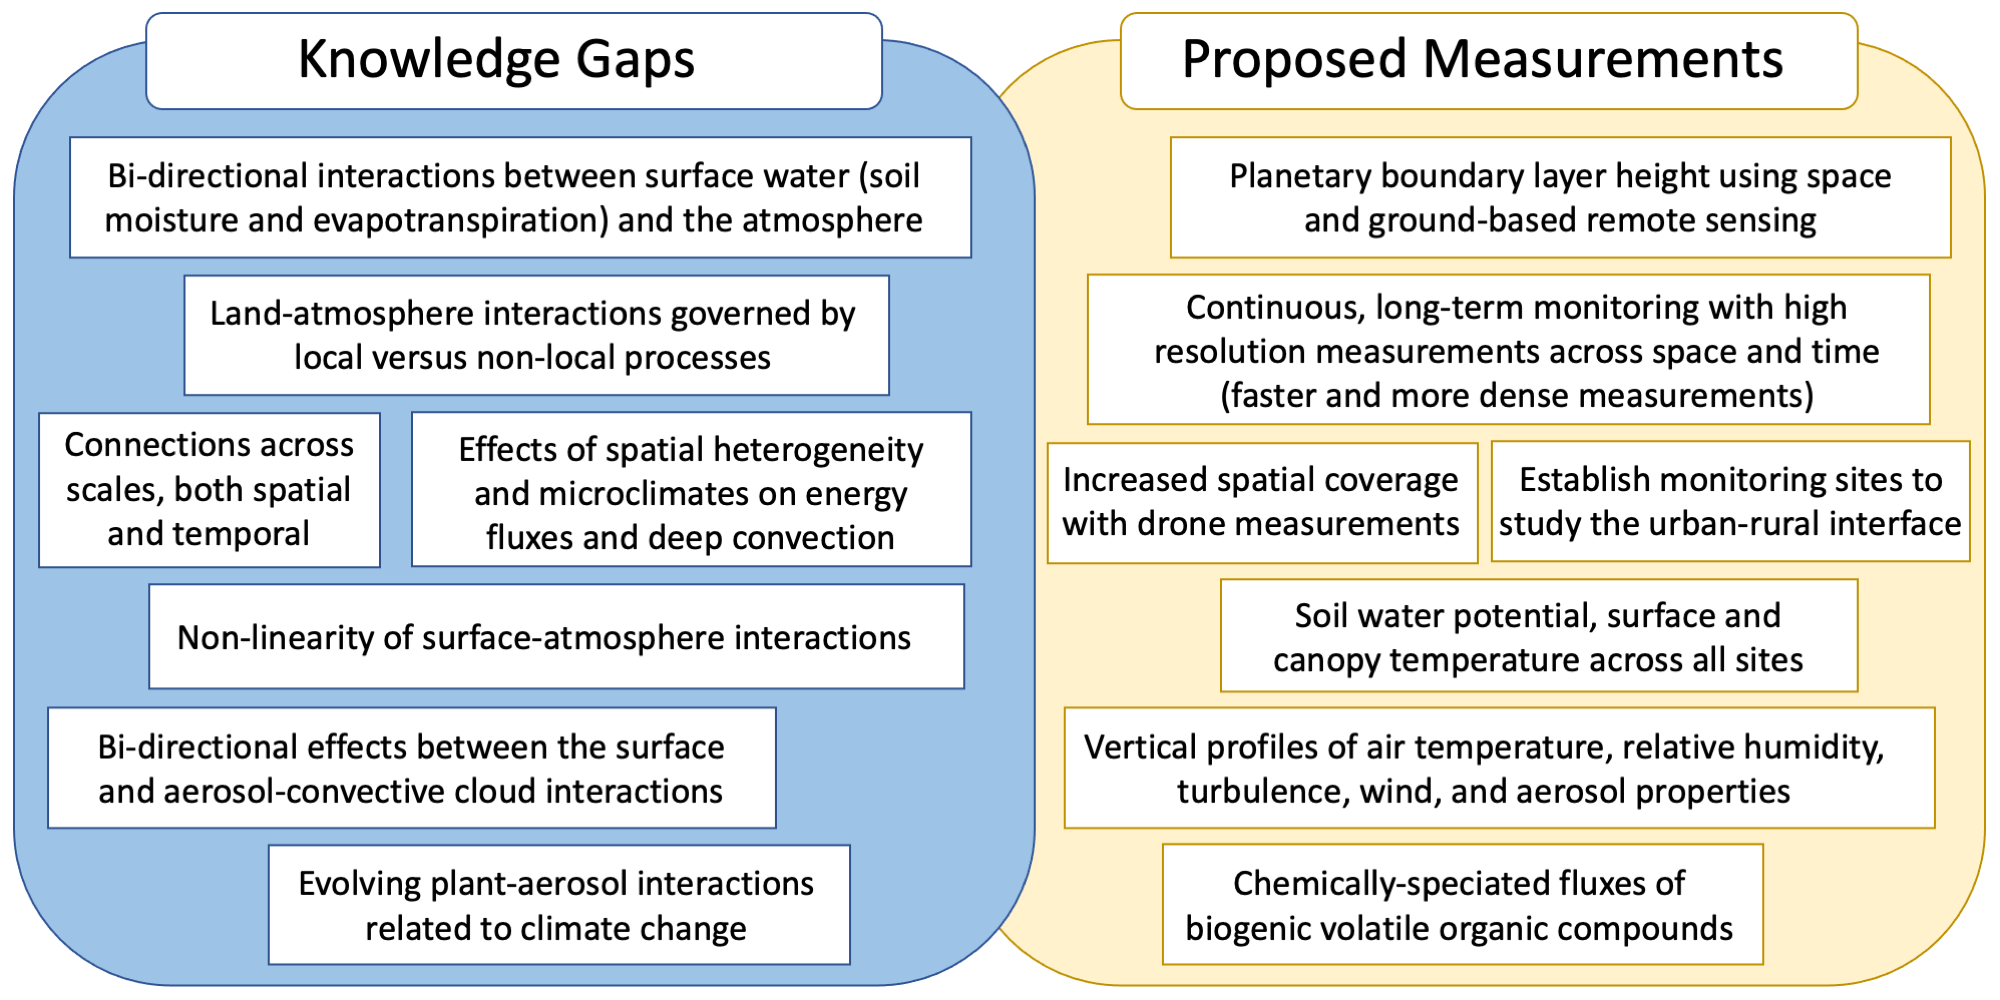 Diagram with 2 parts highlighting knowledge gaps and proposed solutions in land-atmosphere interactions